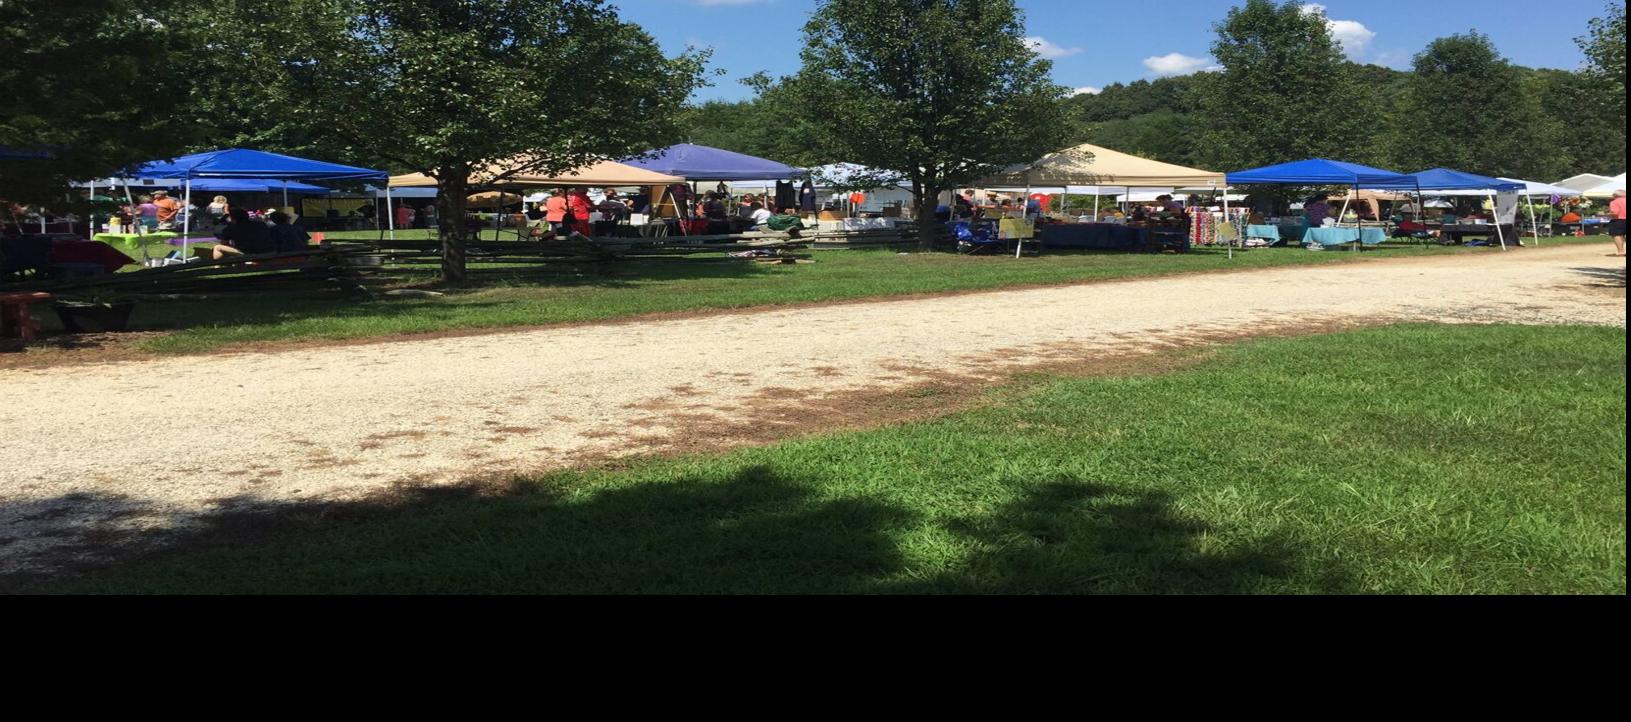 Appomattox Seafood and Oyster Festival to resume on Saturday